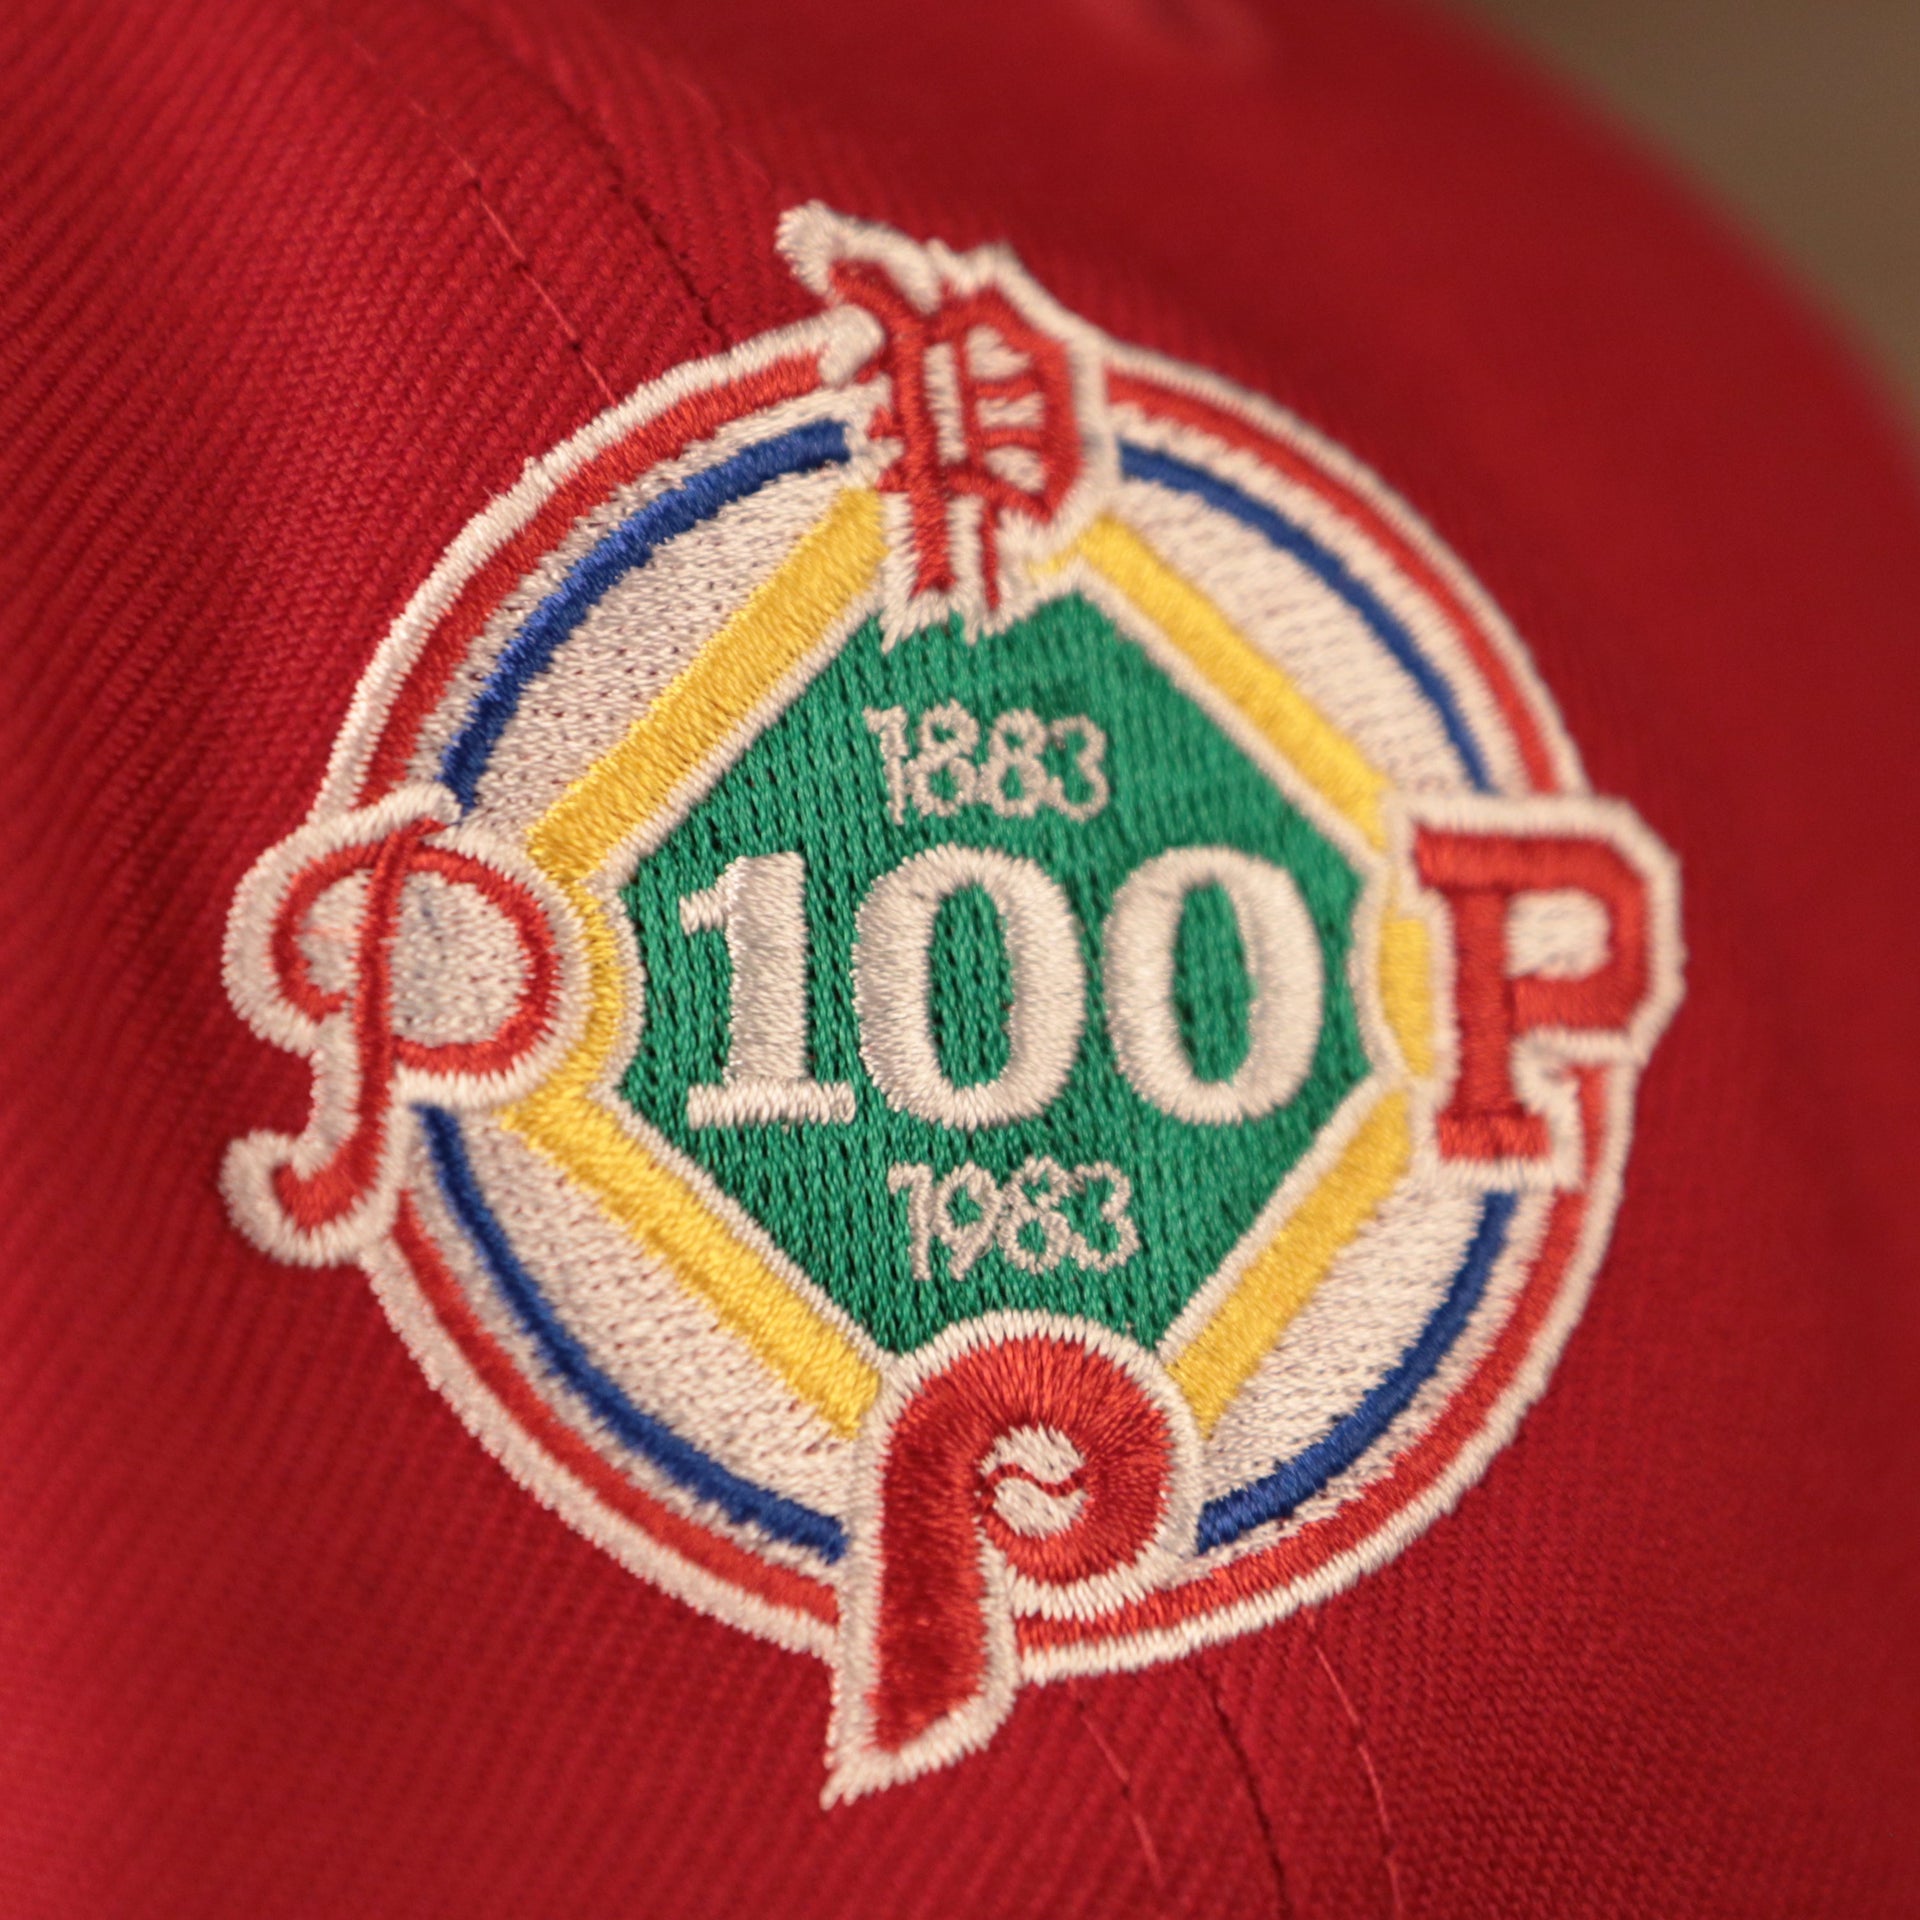 The 1883 to 1983, 100 years patch on the red all over embroidered 59fifty with gray bottom brim.